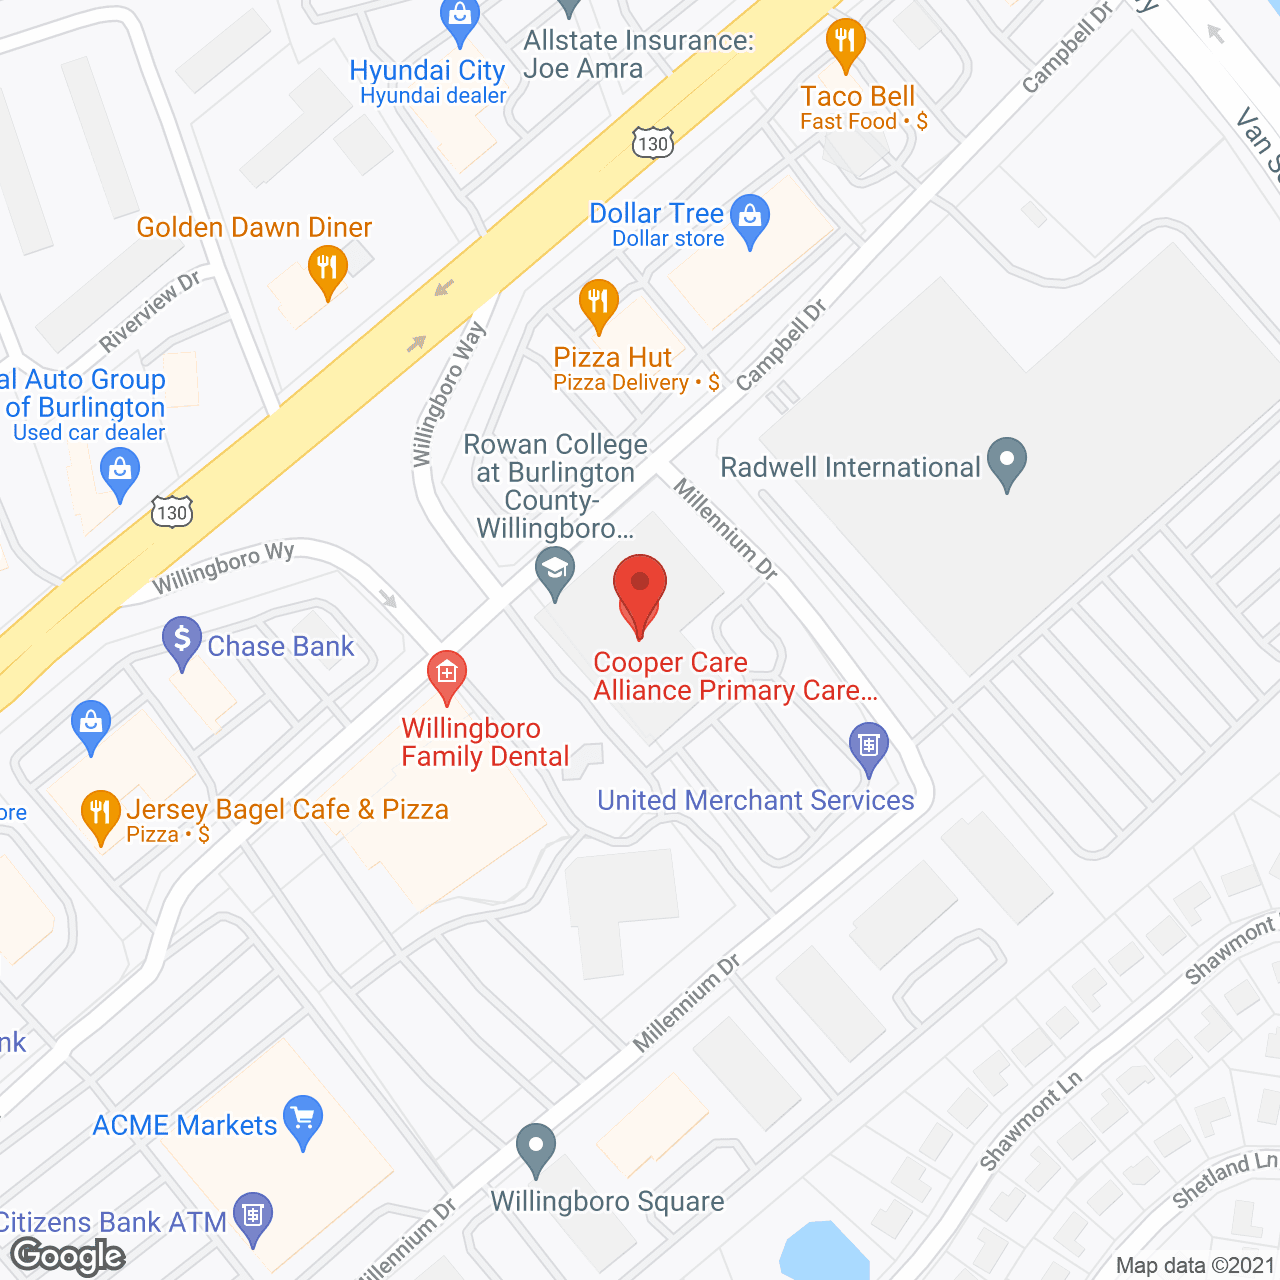 Quality Healthcare Services in google map